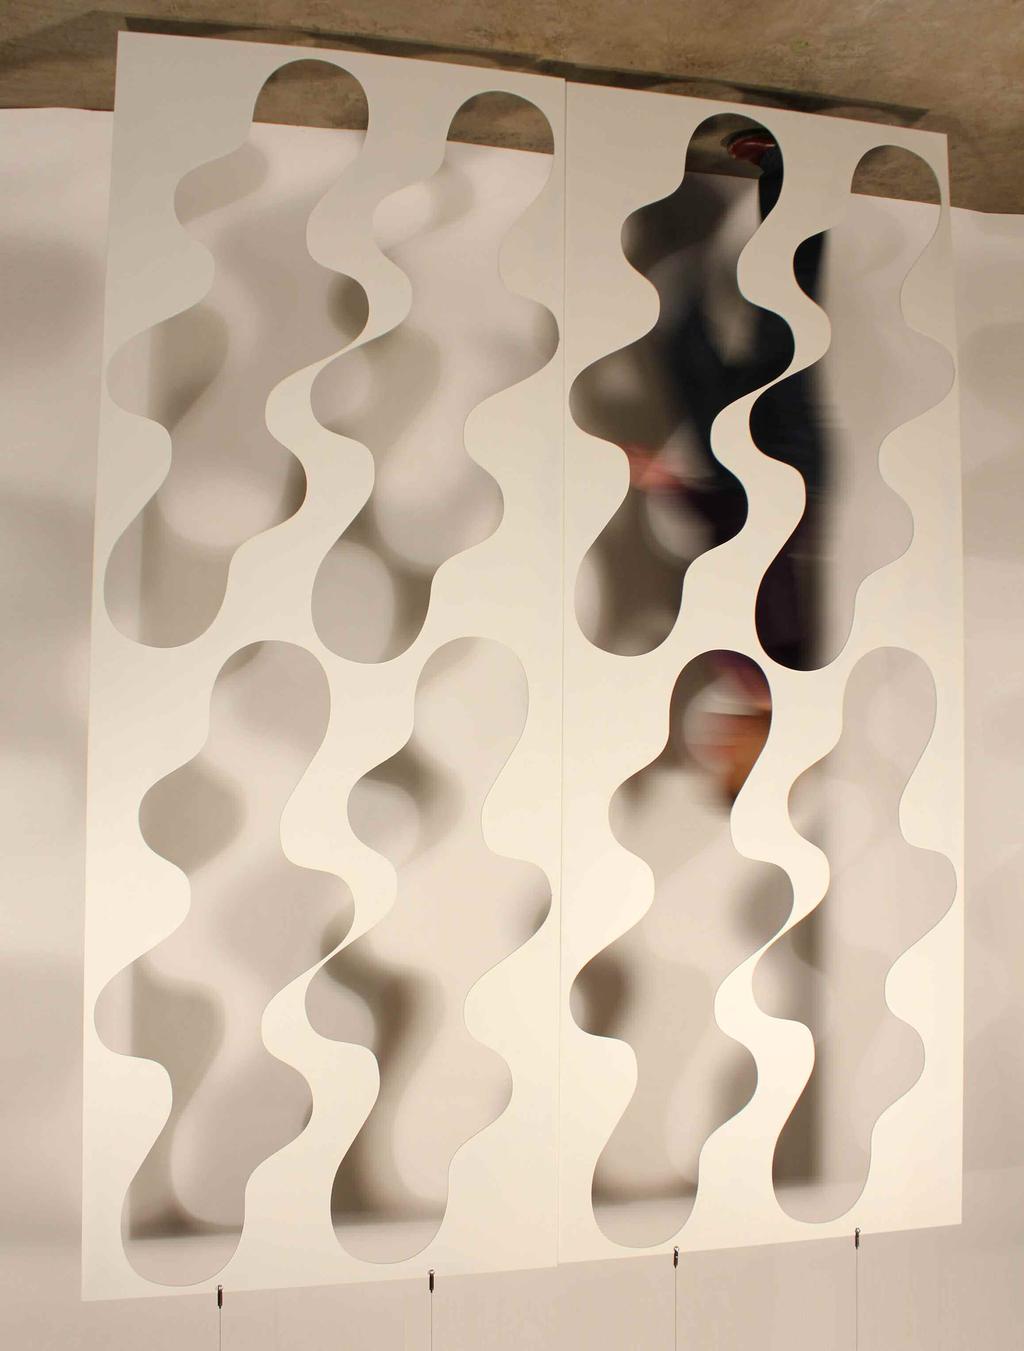 Cloud Screen Introducing the Cloud Screen A floating screen with undulating forms that can be layered